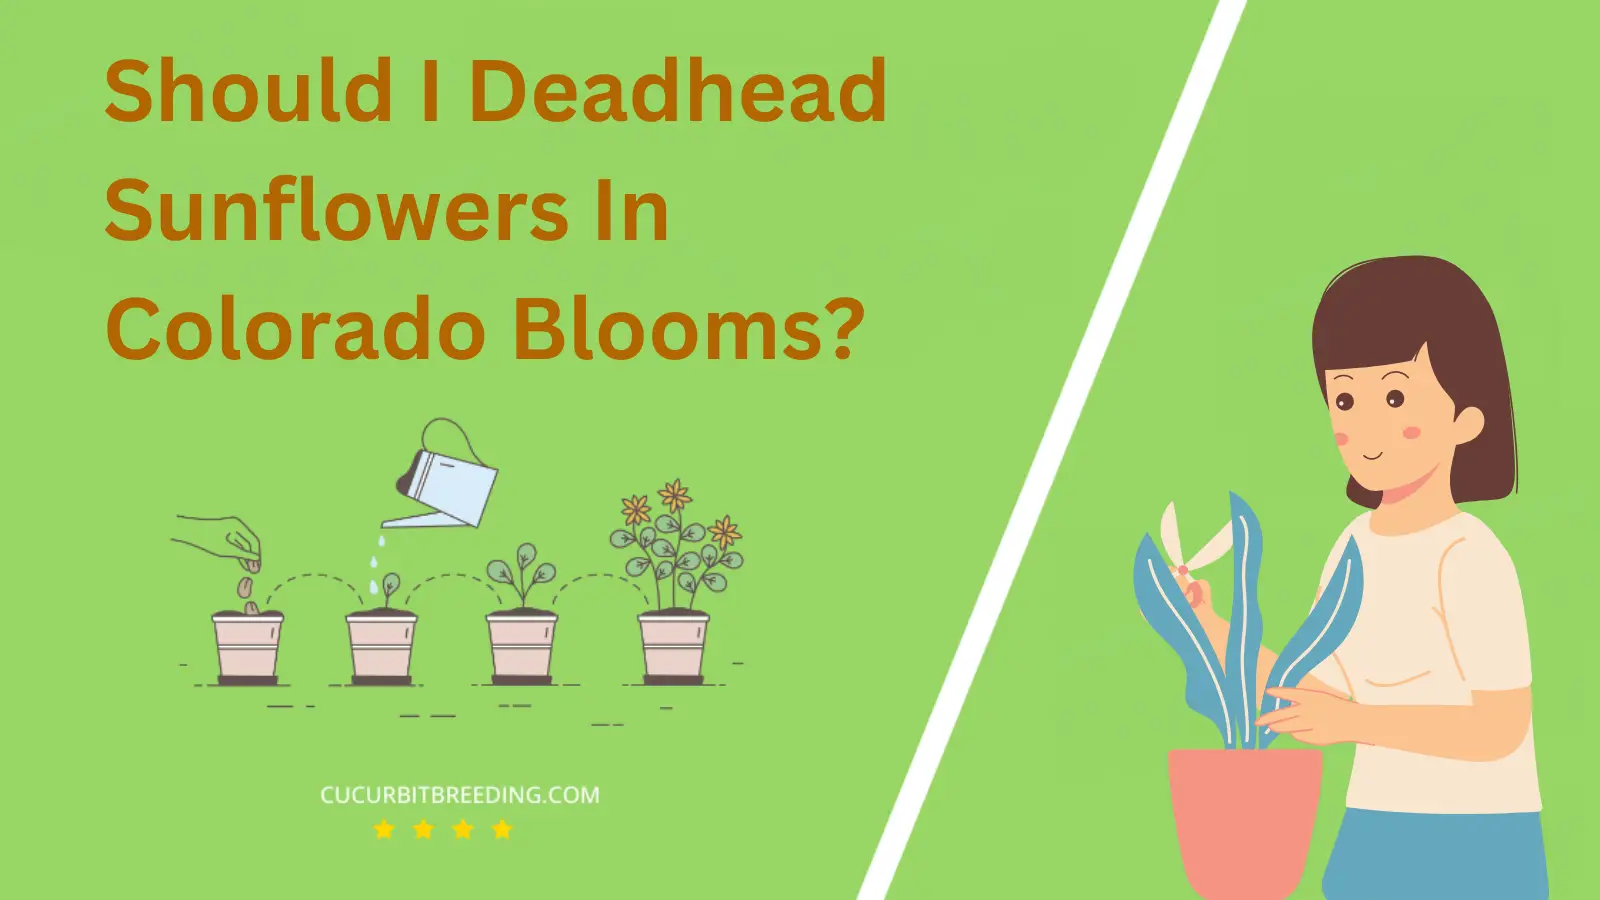 Should I Deadhead Sunflowers In Colorado Blooms?